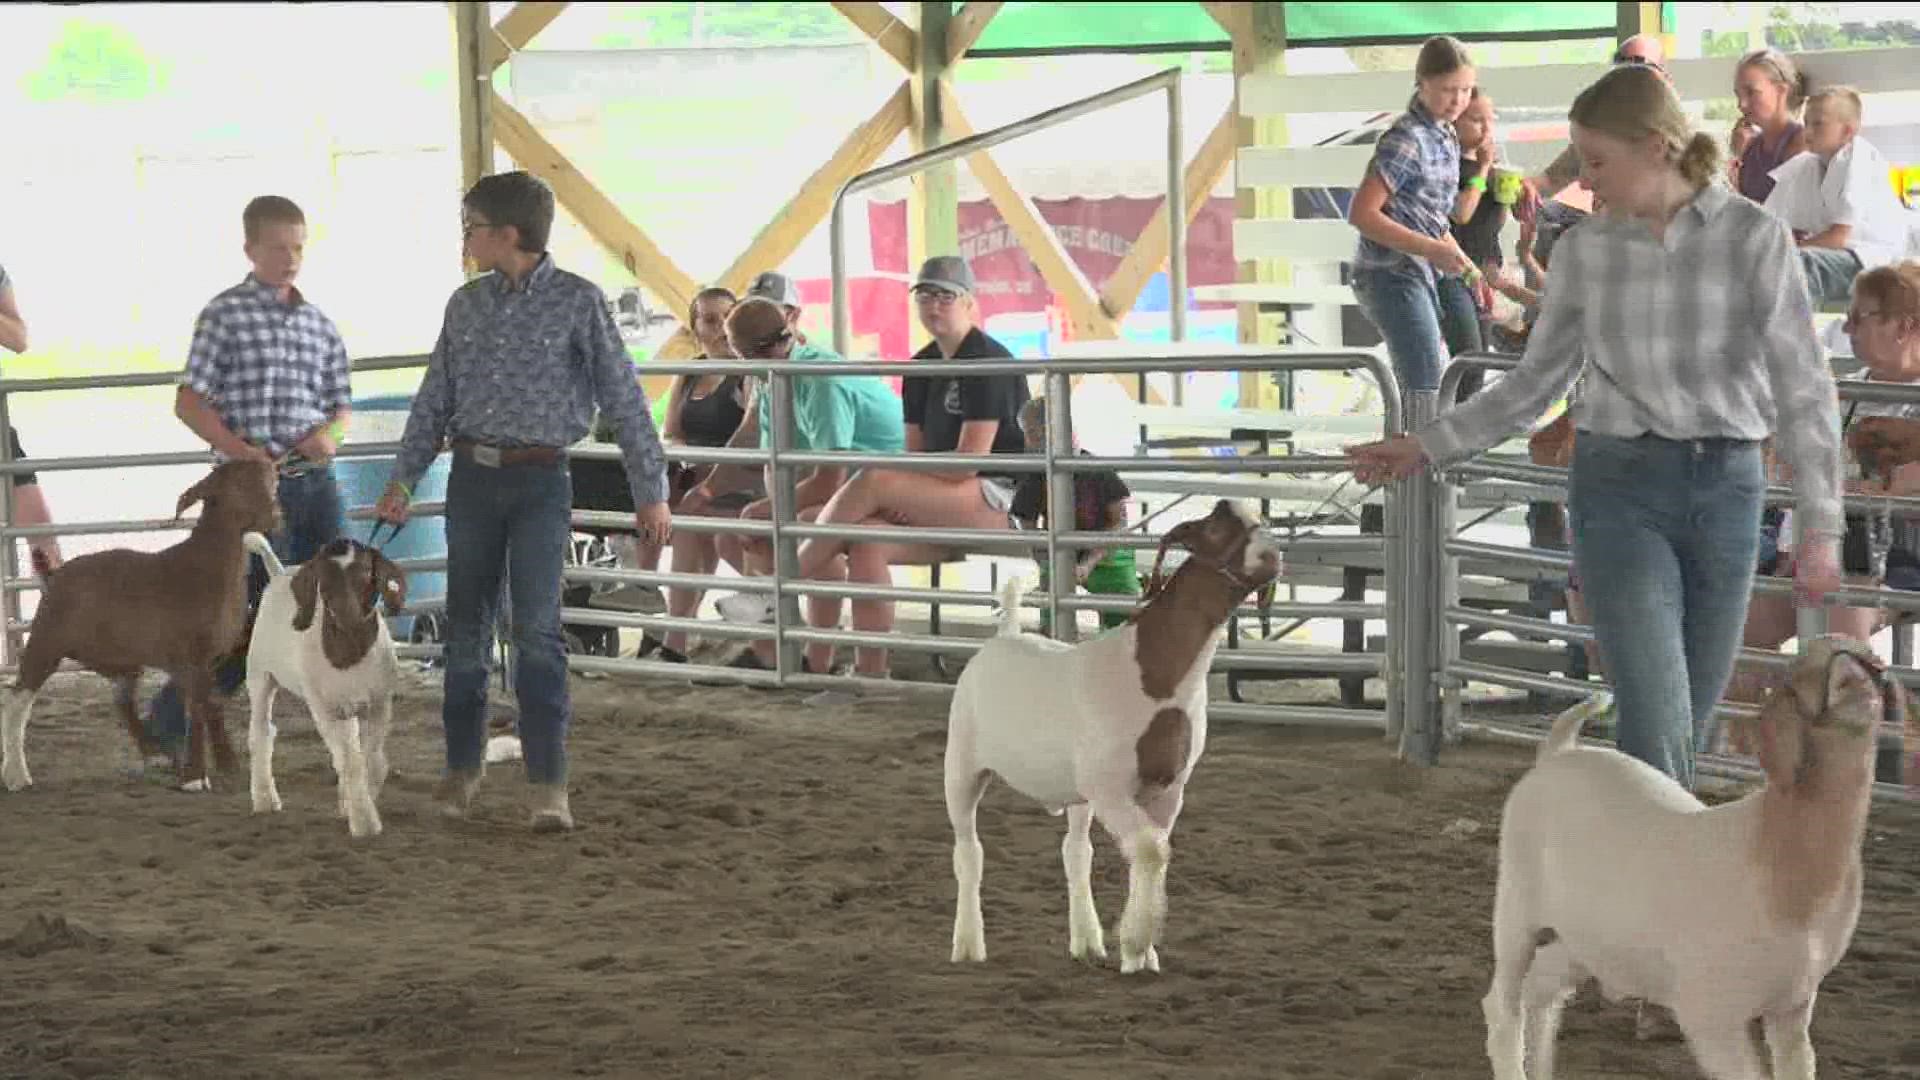 The fair has misting units for crowds and will have the local fire department spray down the roofs of the animal barns throughout the day, as temperatures soar.